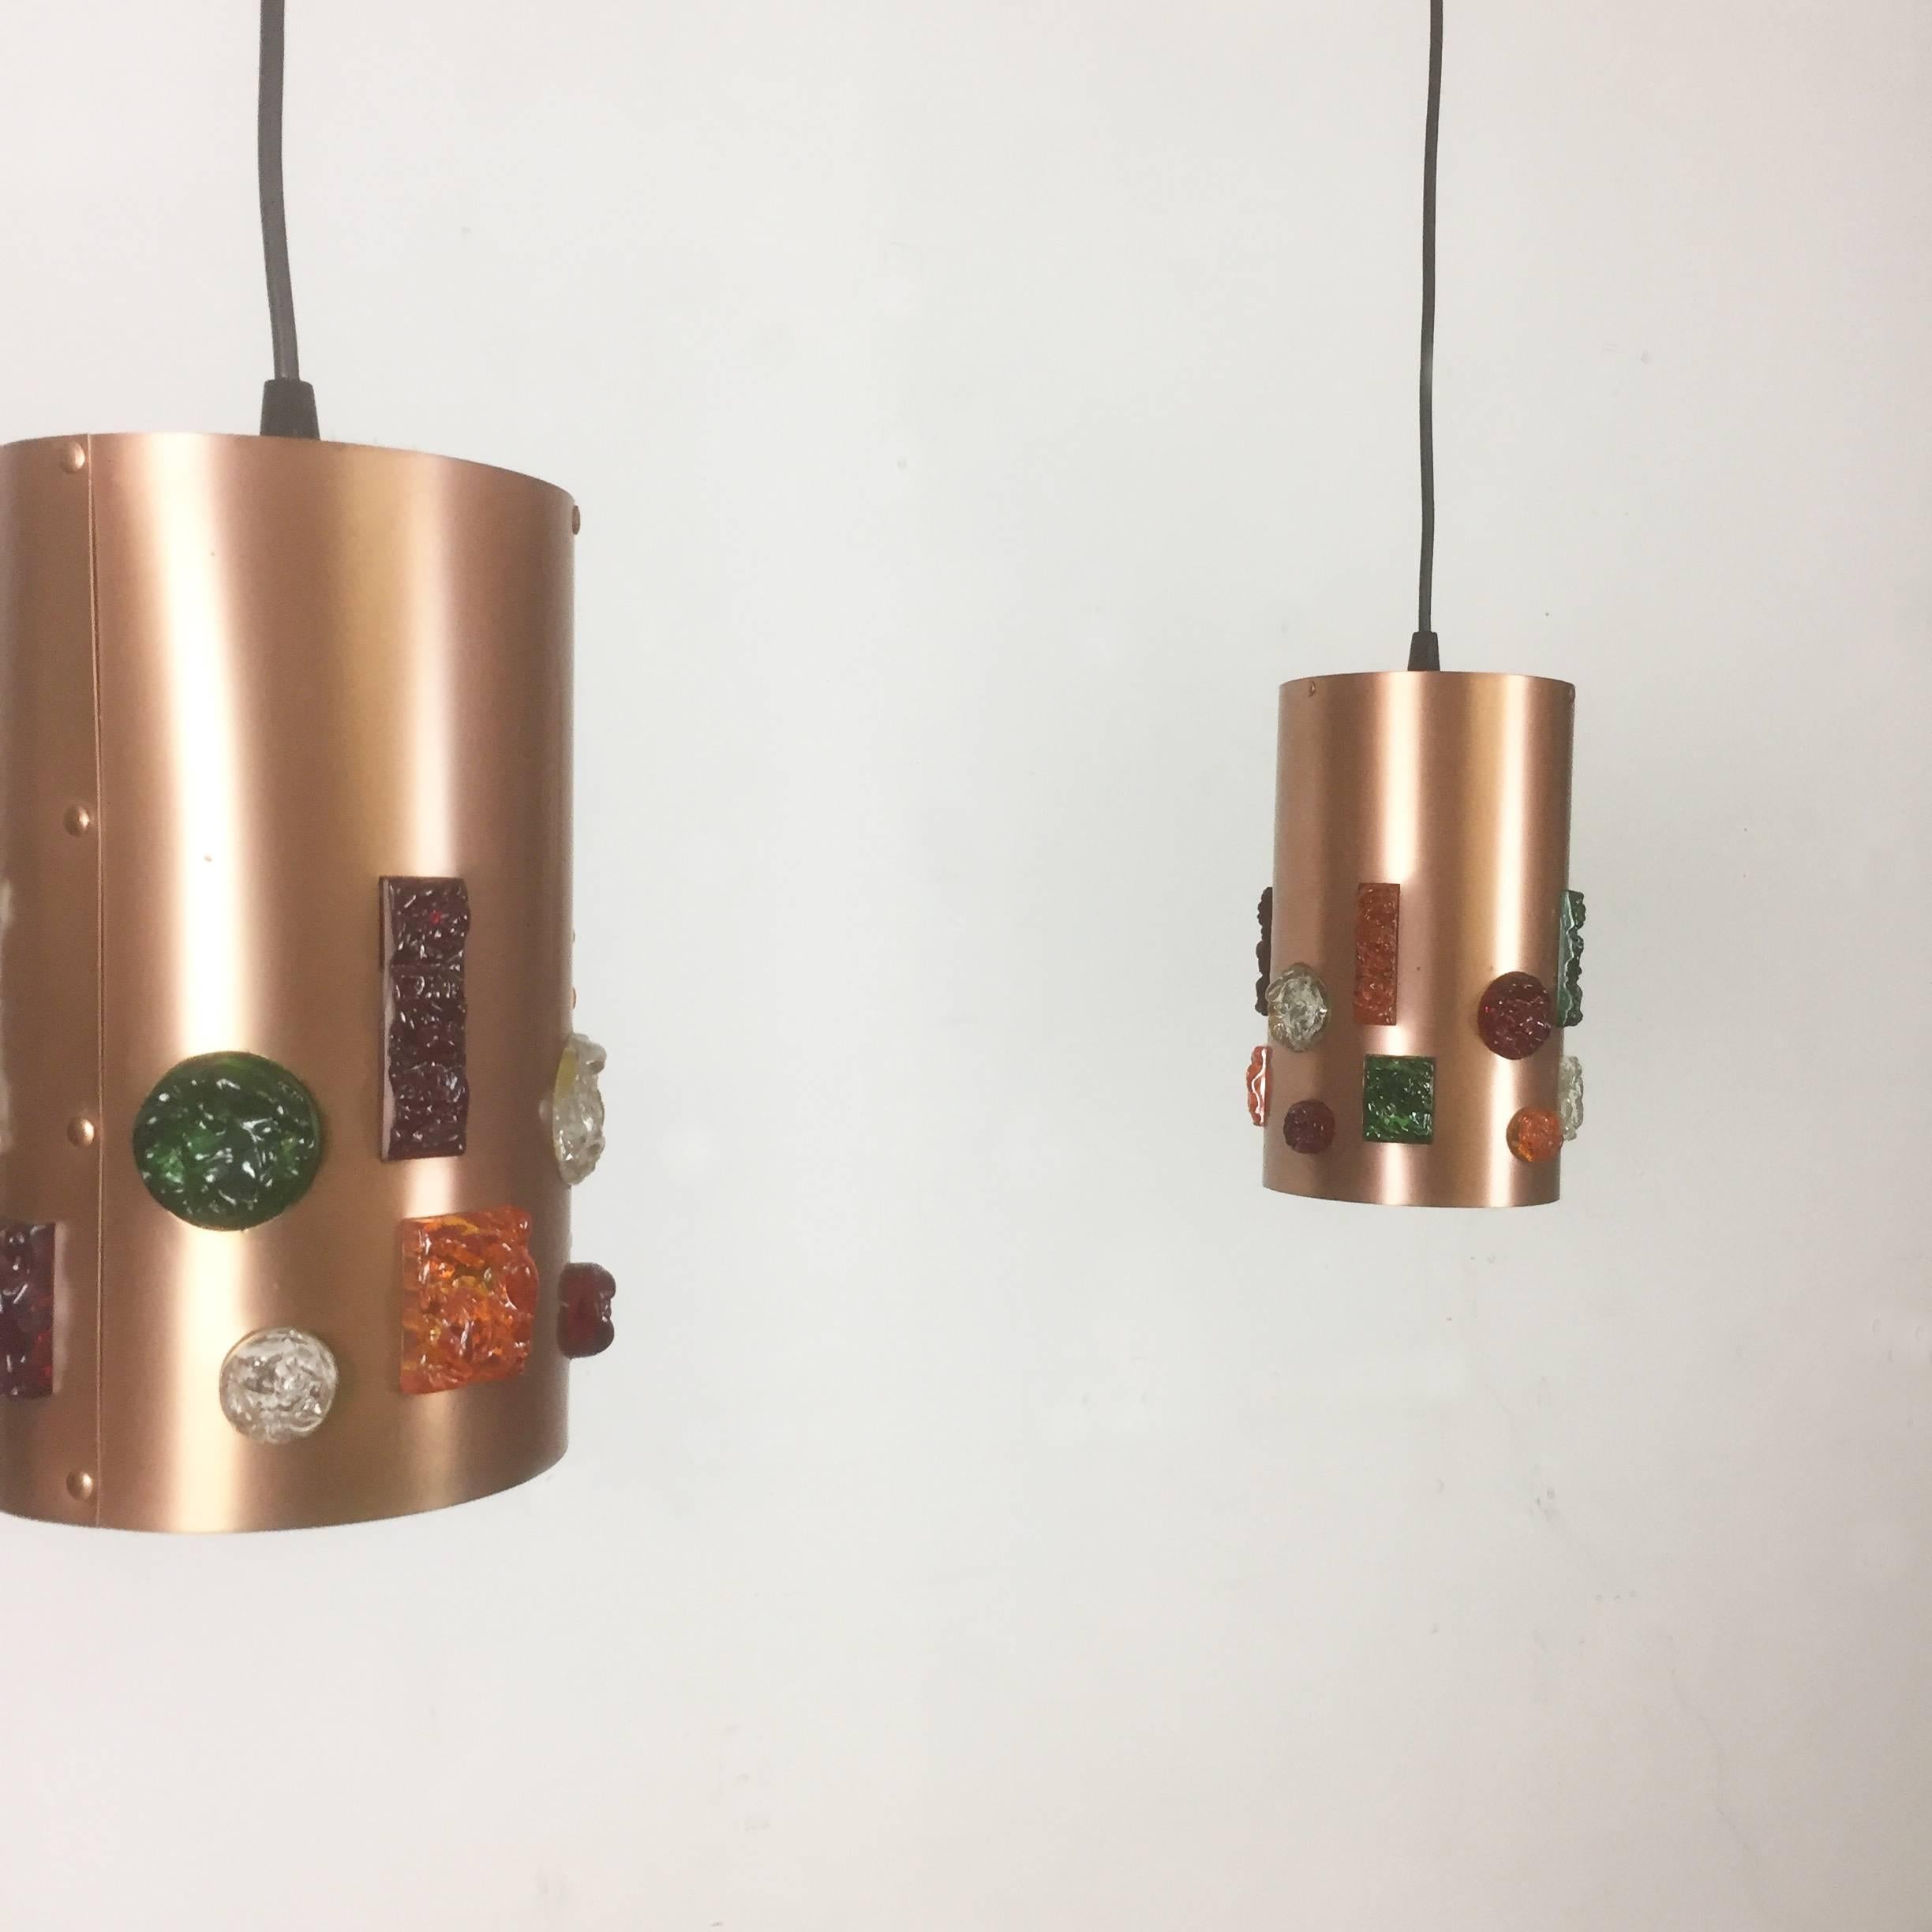 Set of Two Original German Copper Hanging Light, Germany, 1970s For Sale 1